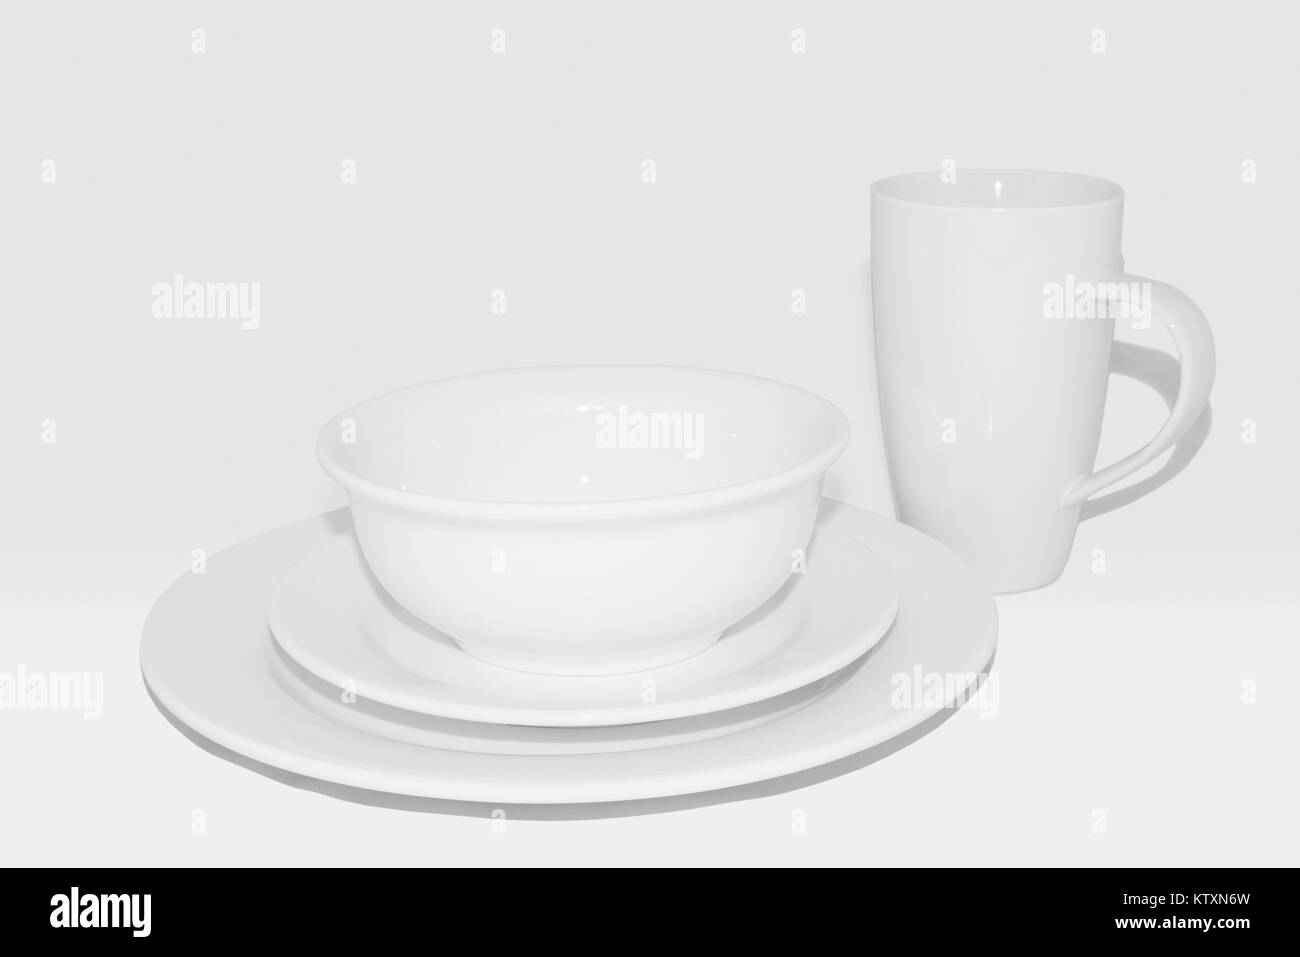 Crockery set including dinner plate, side plate, bowl and large white coffee mug/cup: White crockery against a white background,100% grayscale. Stock Photo